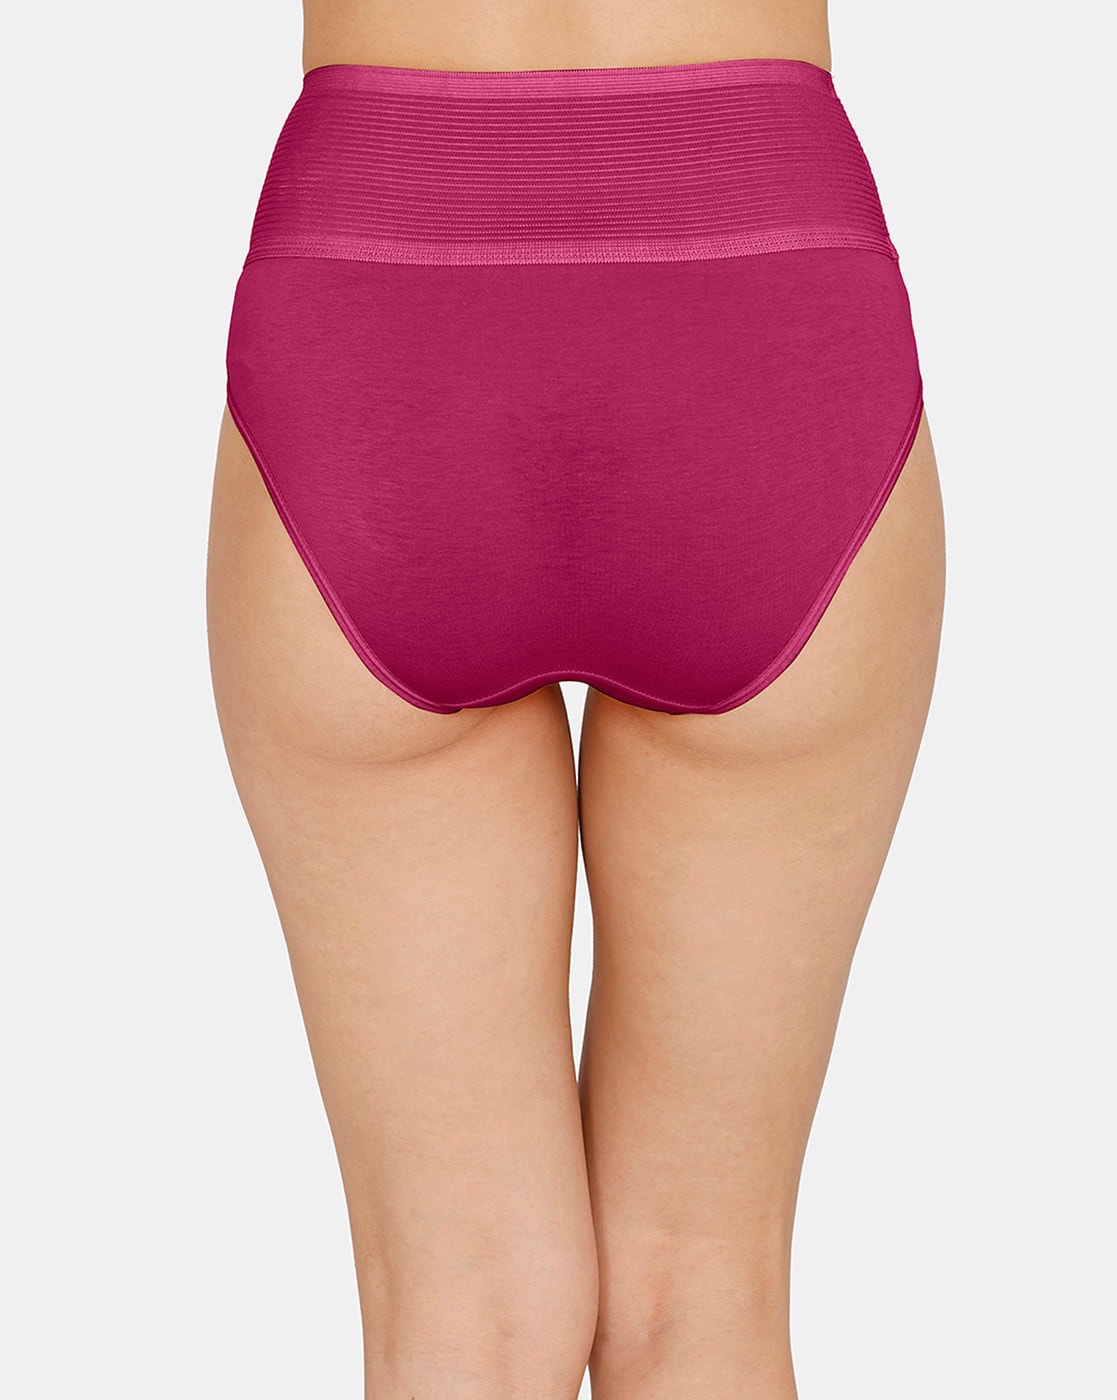 Buy Black/Beet Red Panties for Women by Nejo - The New Mom's